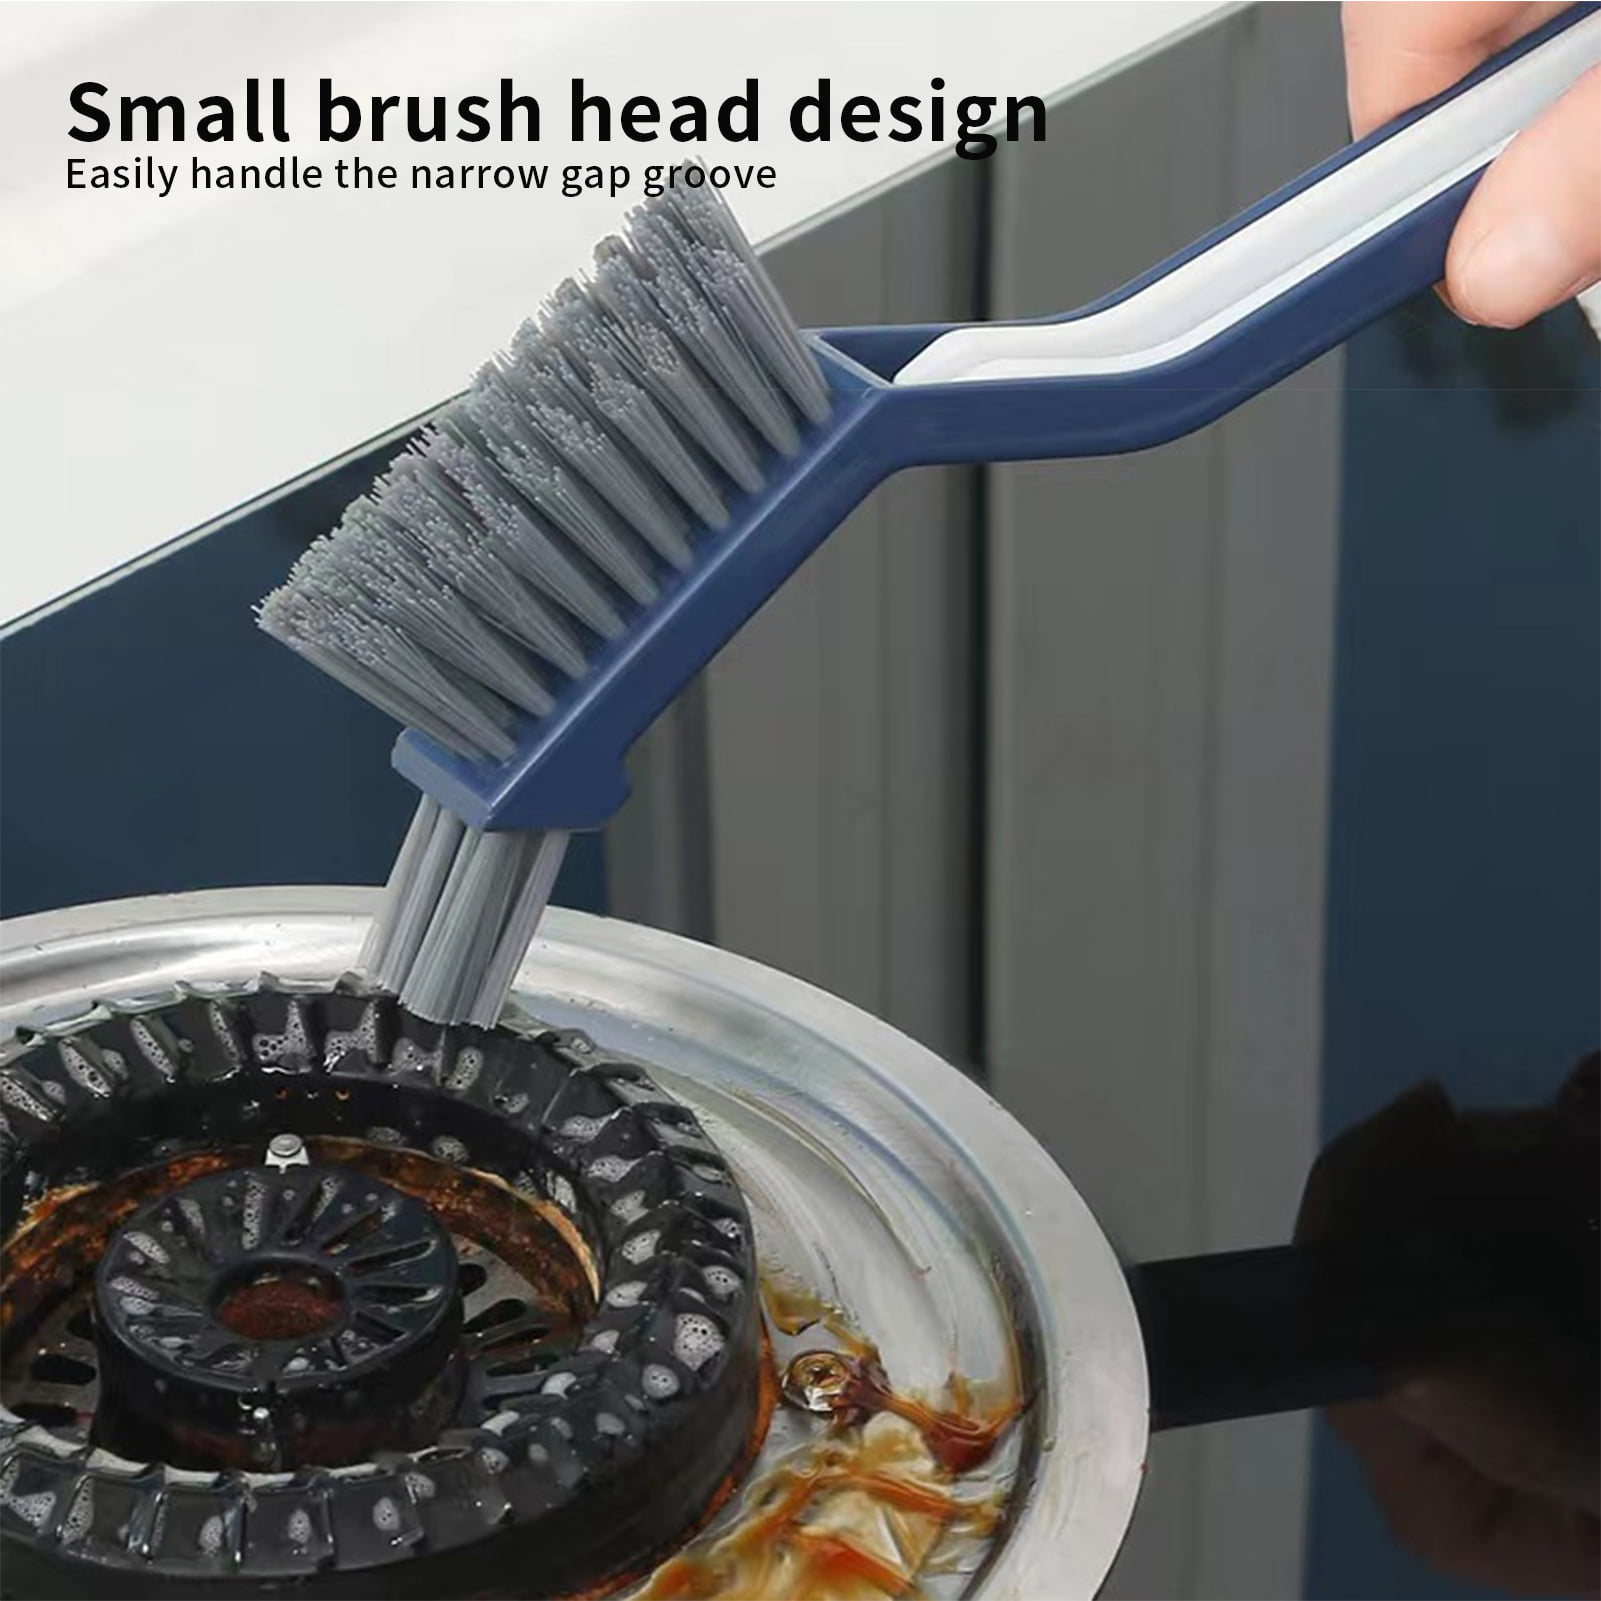 Hesroicy Scrub Brush Efficient Thick Texture Compact Design